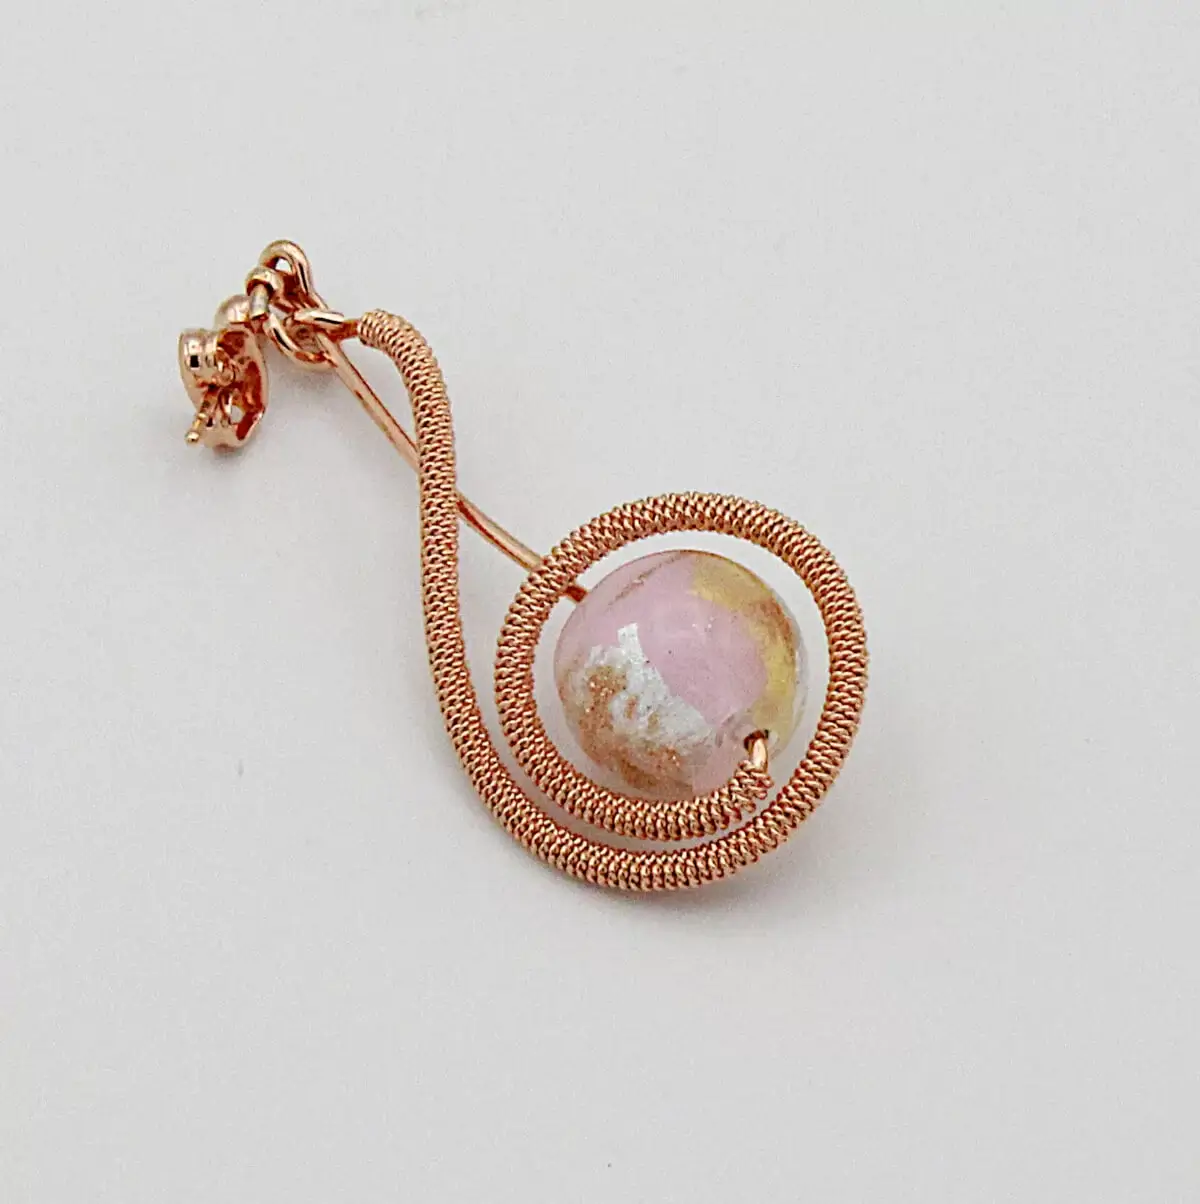 Rose gold tone arabesque shaped long earrings with pinkish Murano glass bead